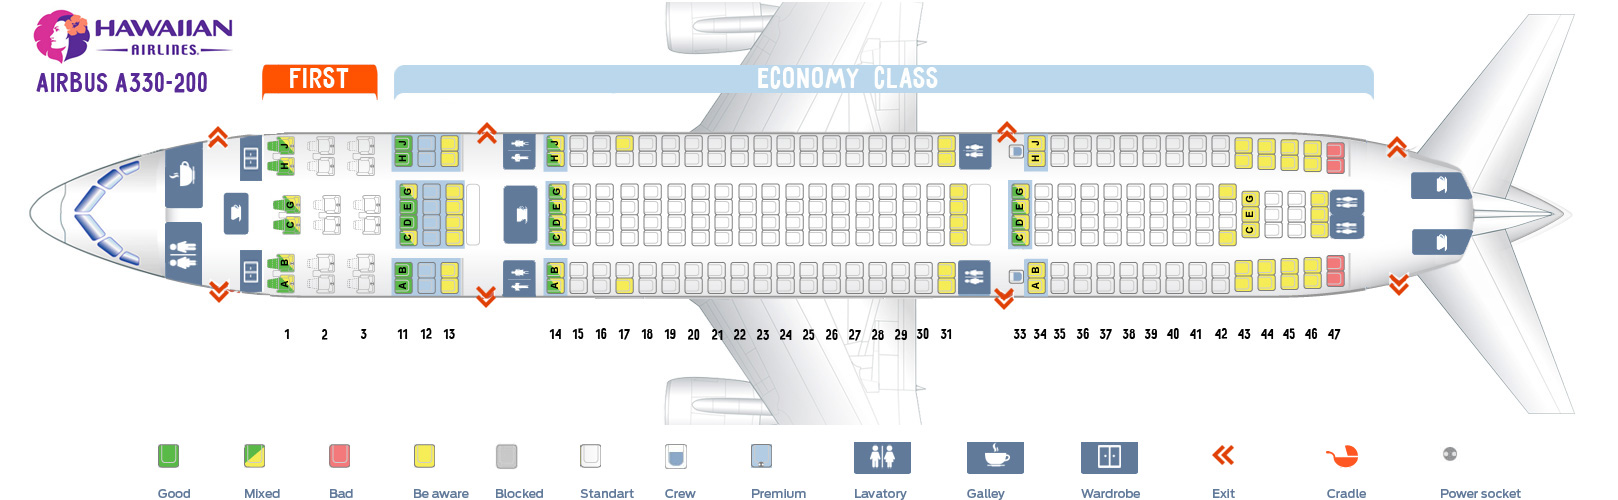 Seat map Airbus A330200 Hawaiian Airlines. Best seats in 